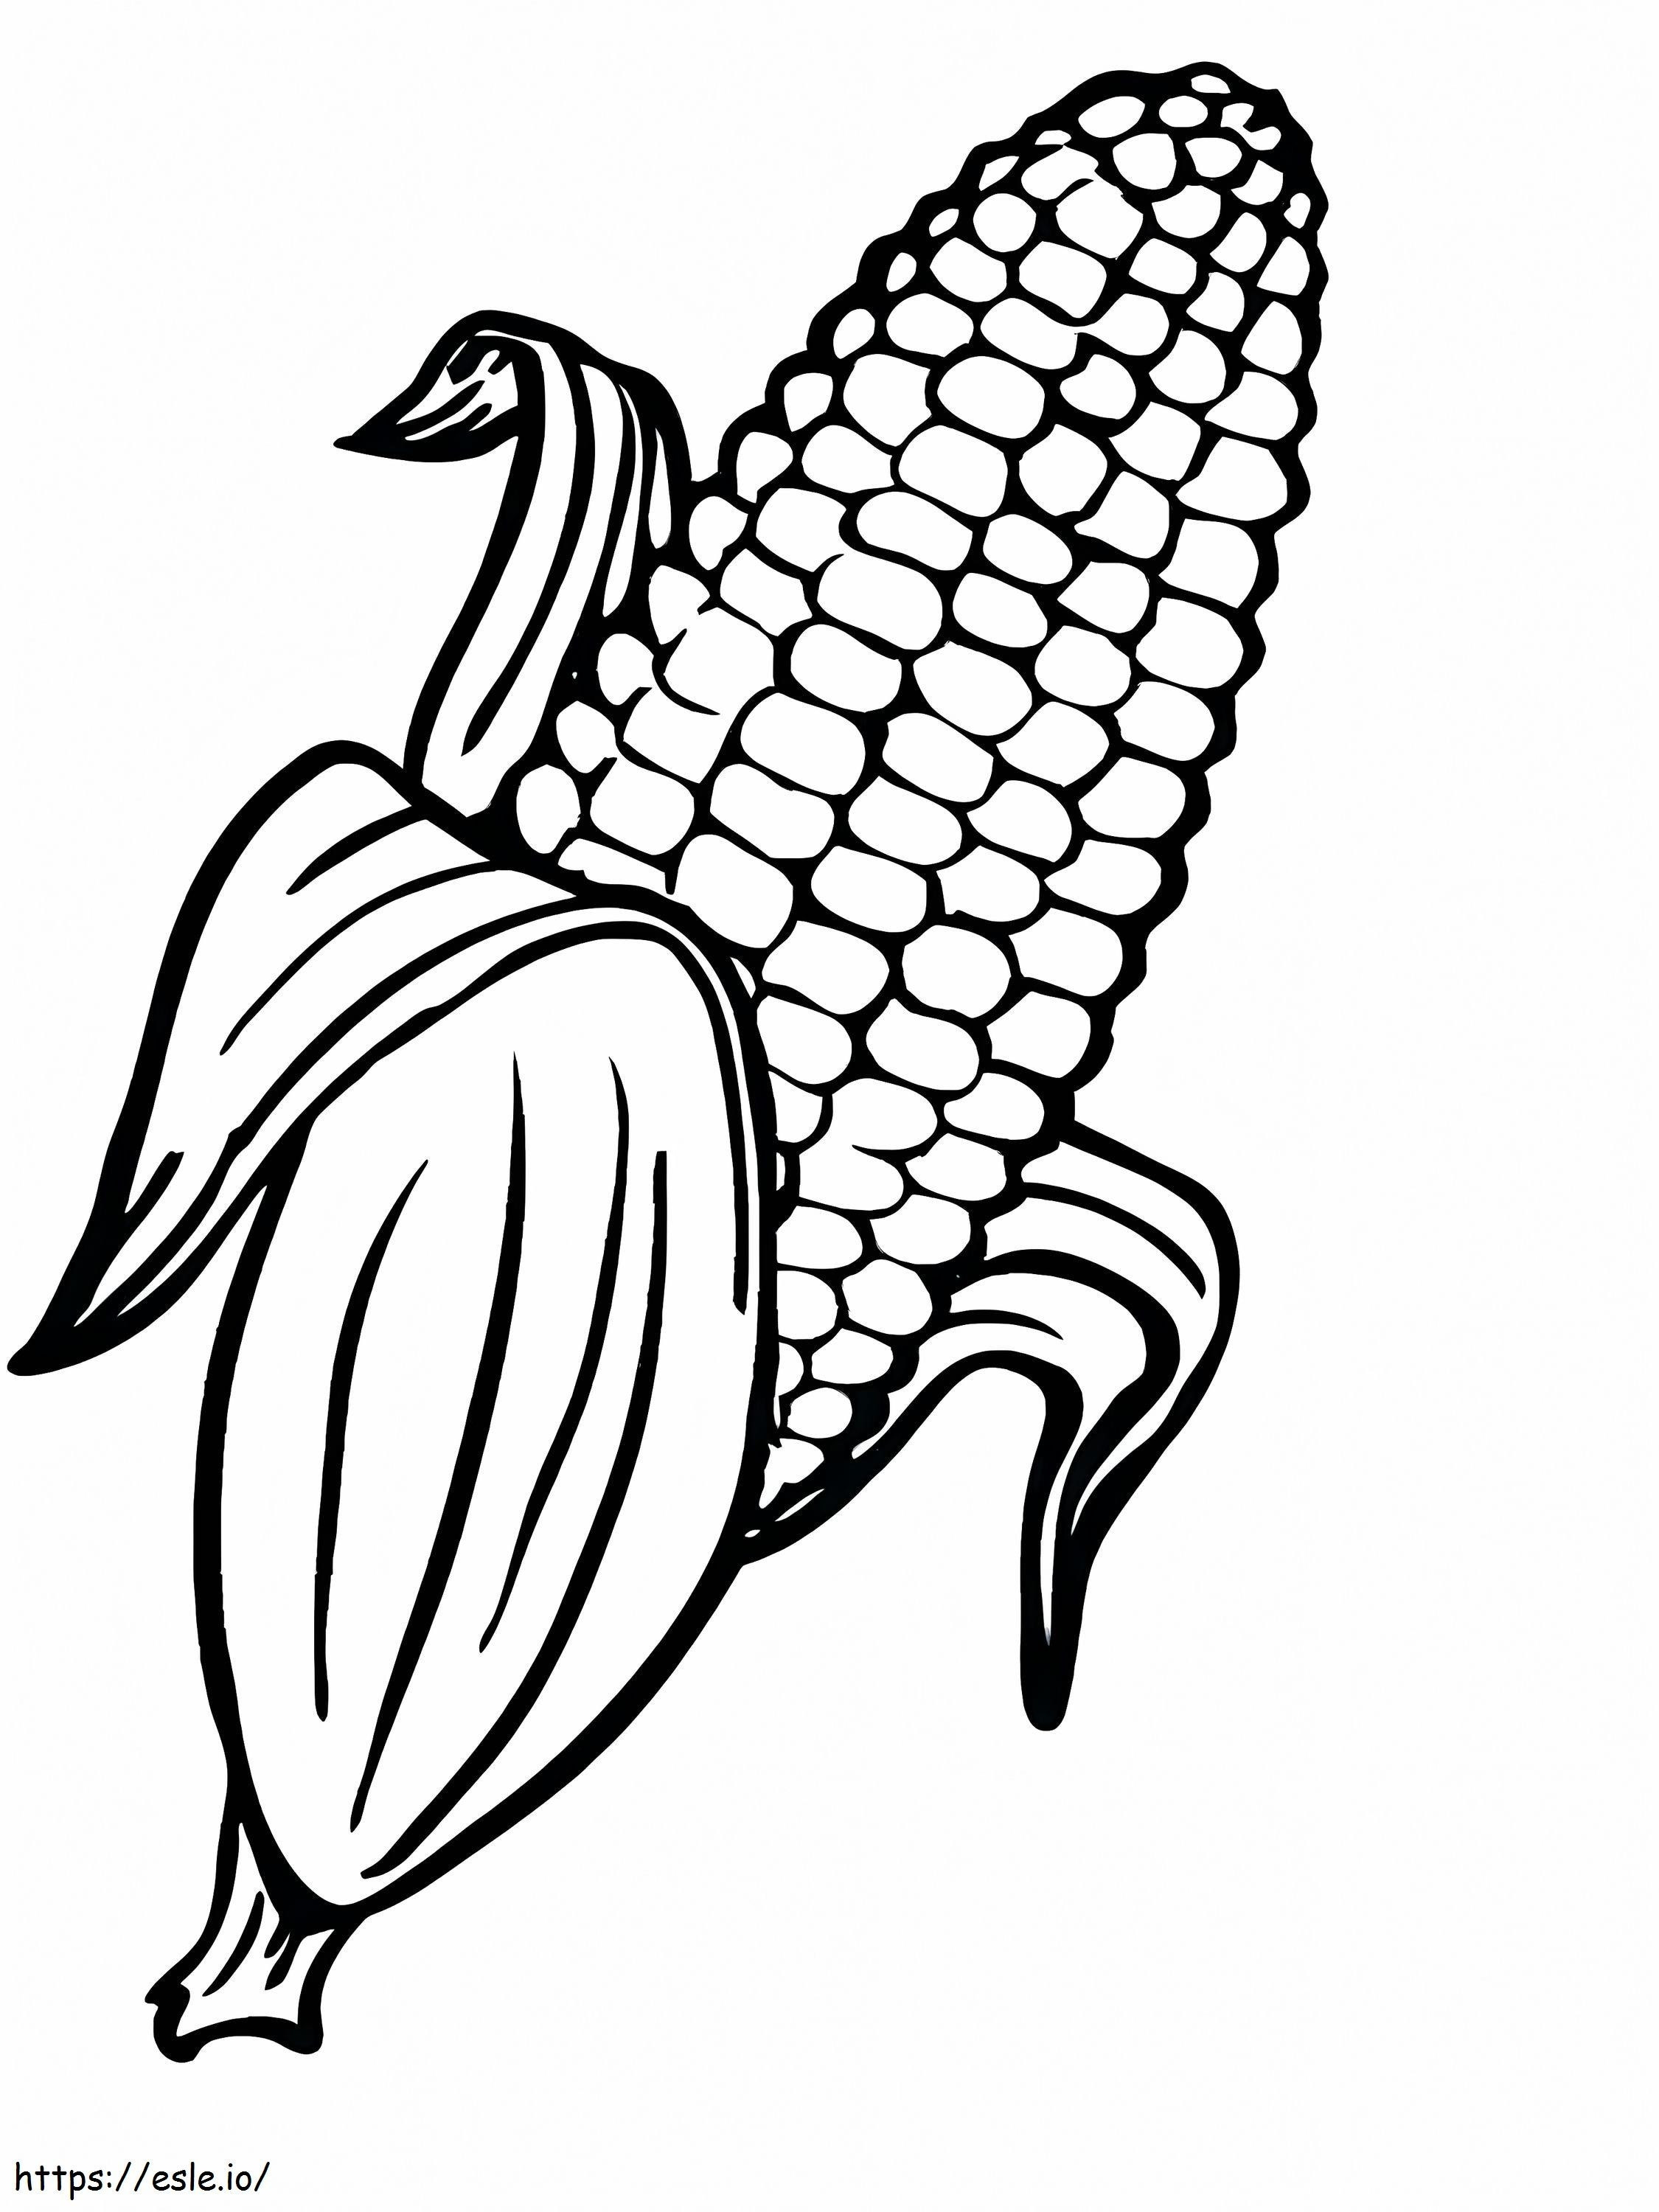 Simple Corn coloring page